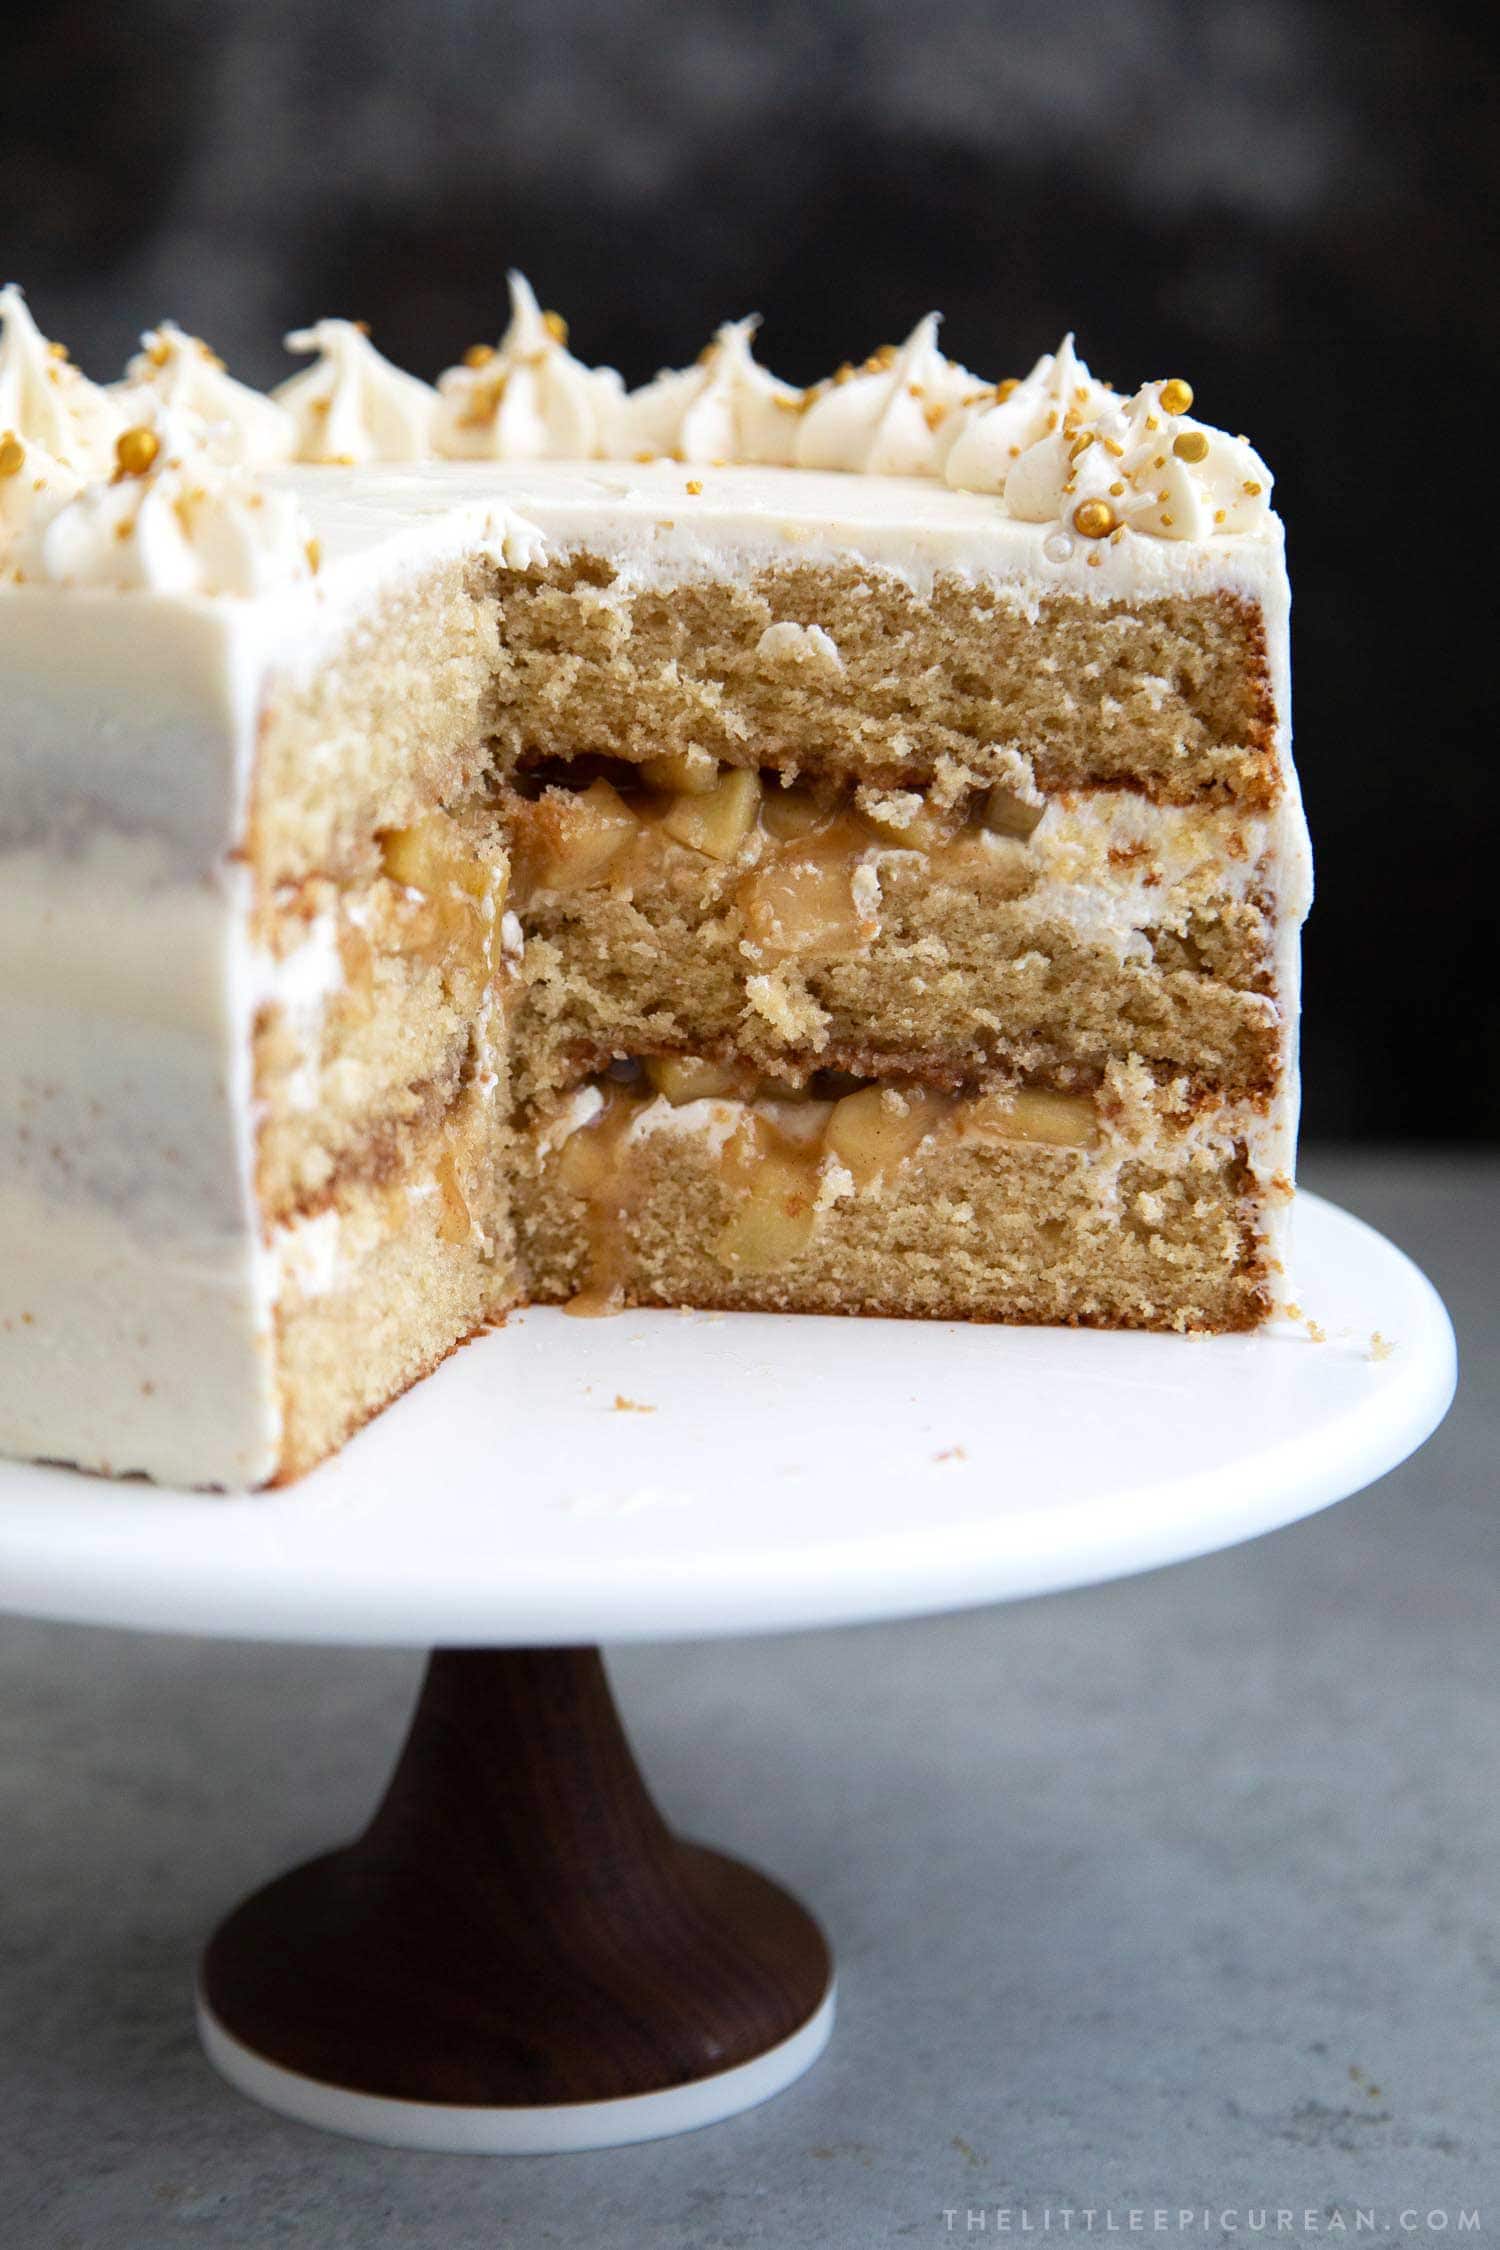 Apple Cider Layer Cake. Yellow cake flavored with apple cider. Layered cake is filled with cooked apples and frosted with apple cider buttercream.